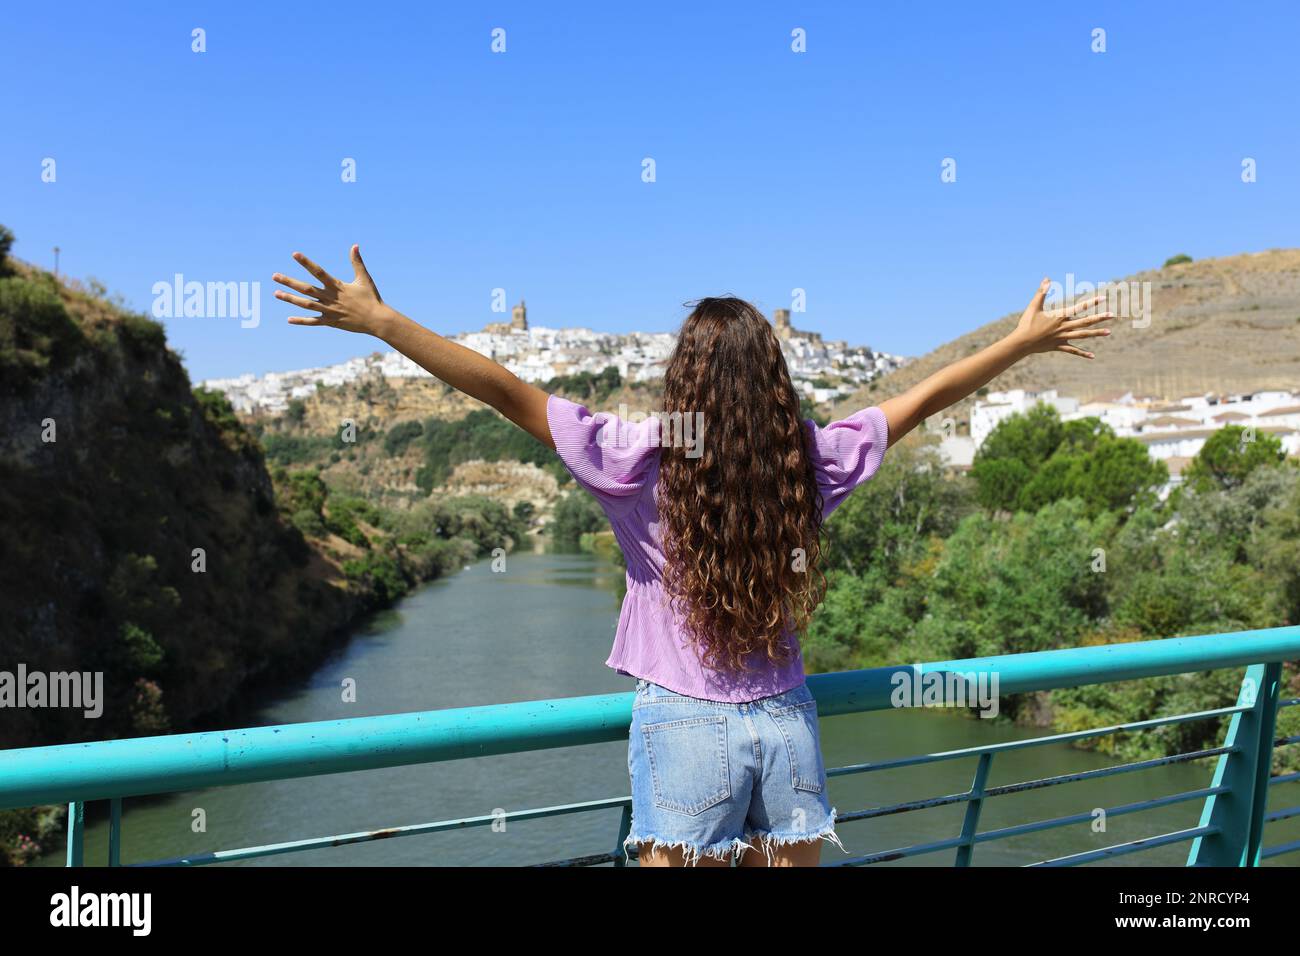 Back view portrait of a tourist celebrating vacation contemplating town views Stock Photo